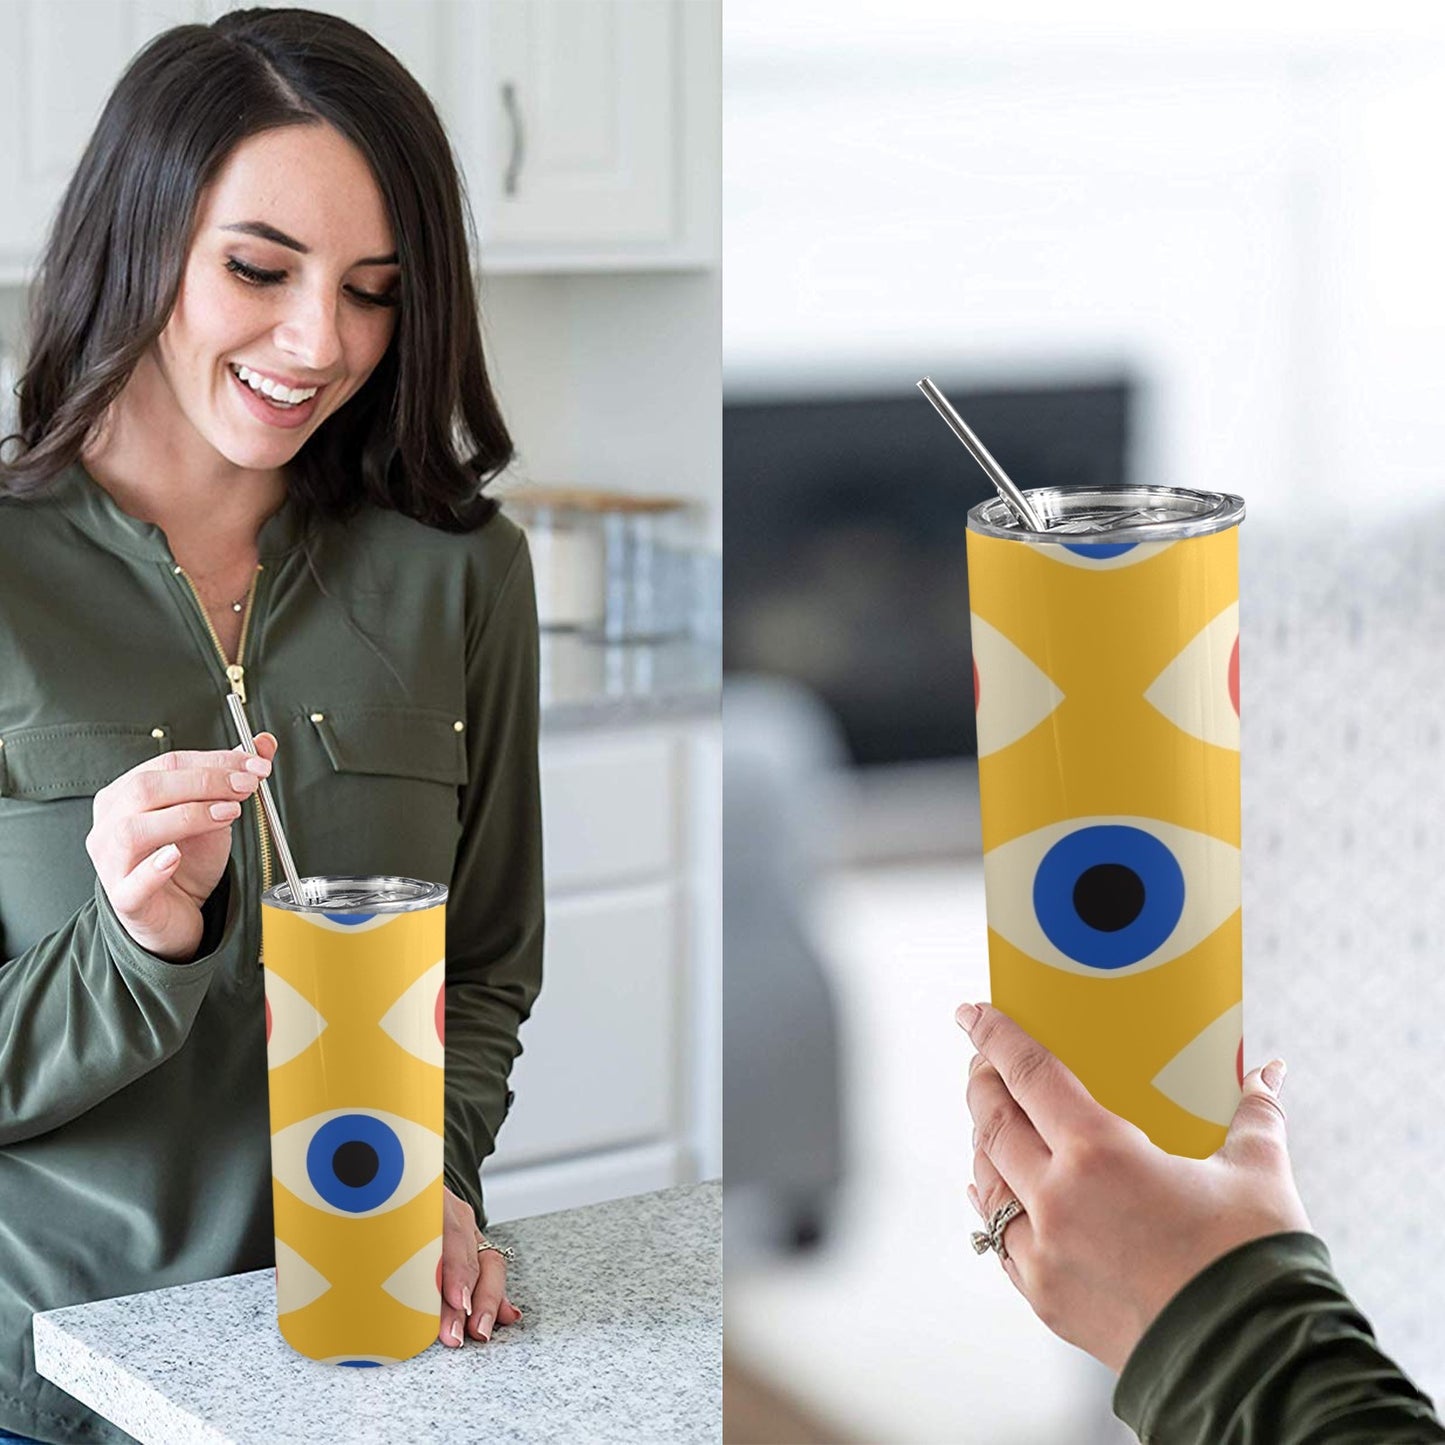 Eyes on Yellow - 20oz Tall Skinny Tumbler with Lid and Straw 20oz Tall Skinny Tumbler with Lid and Straw